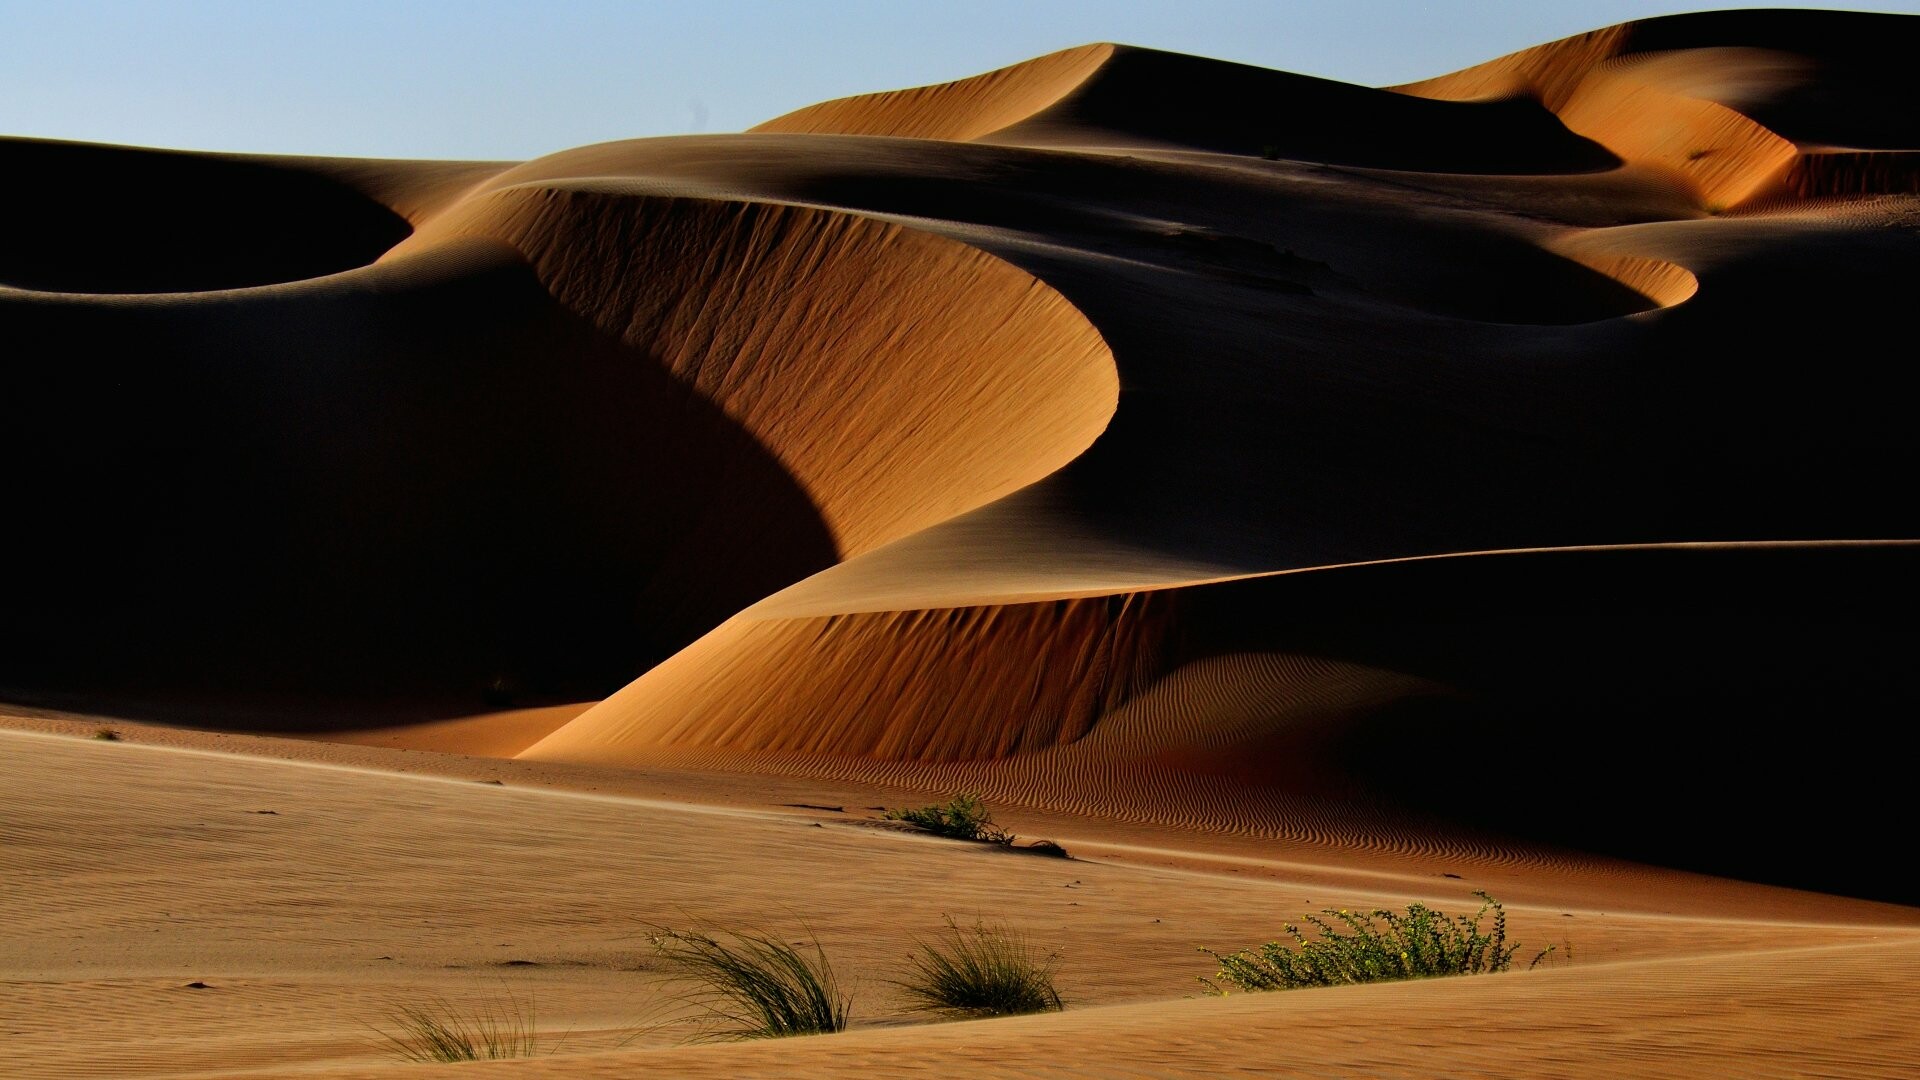 Desert: Areas that receive very little precipitation. 1920x1080 Full HD Background.